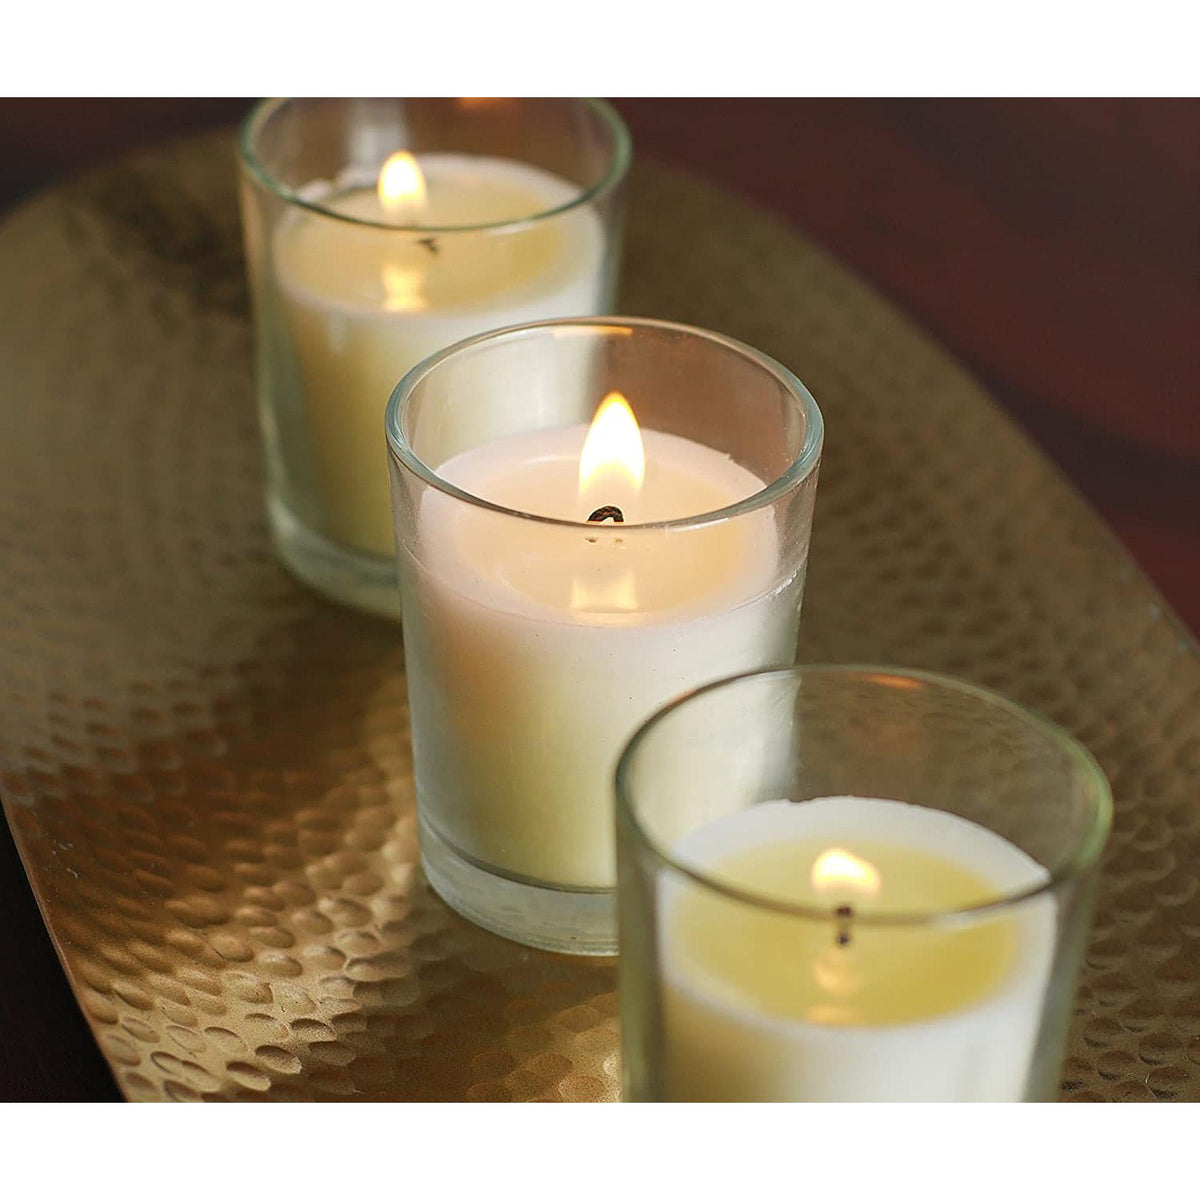 HOSLEY®  Clear Glass Filled Unscented Votive Candles, Ivory Color, 480 pack